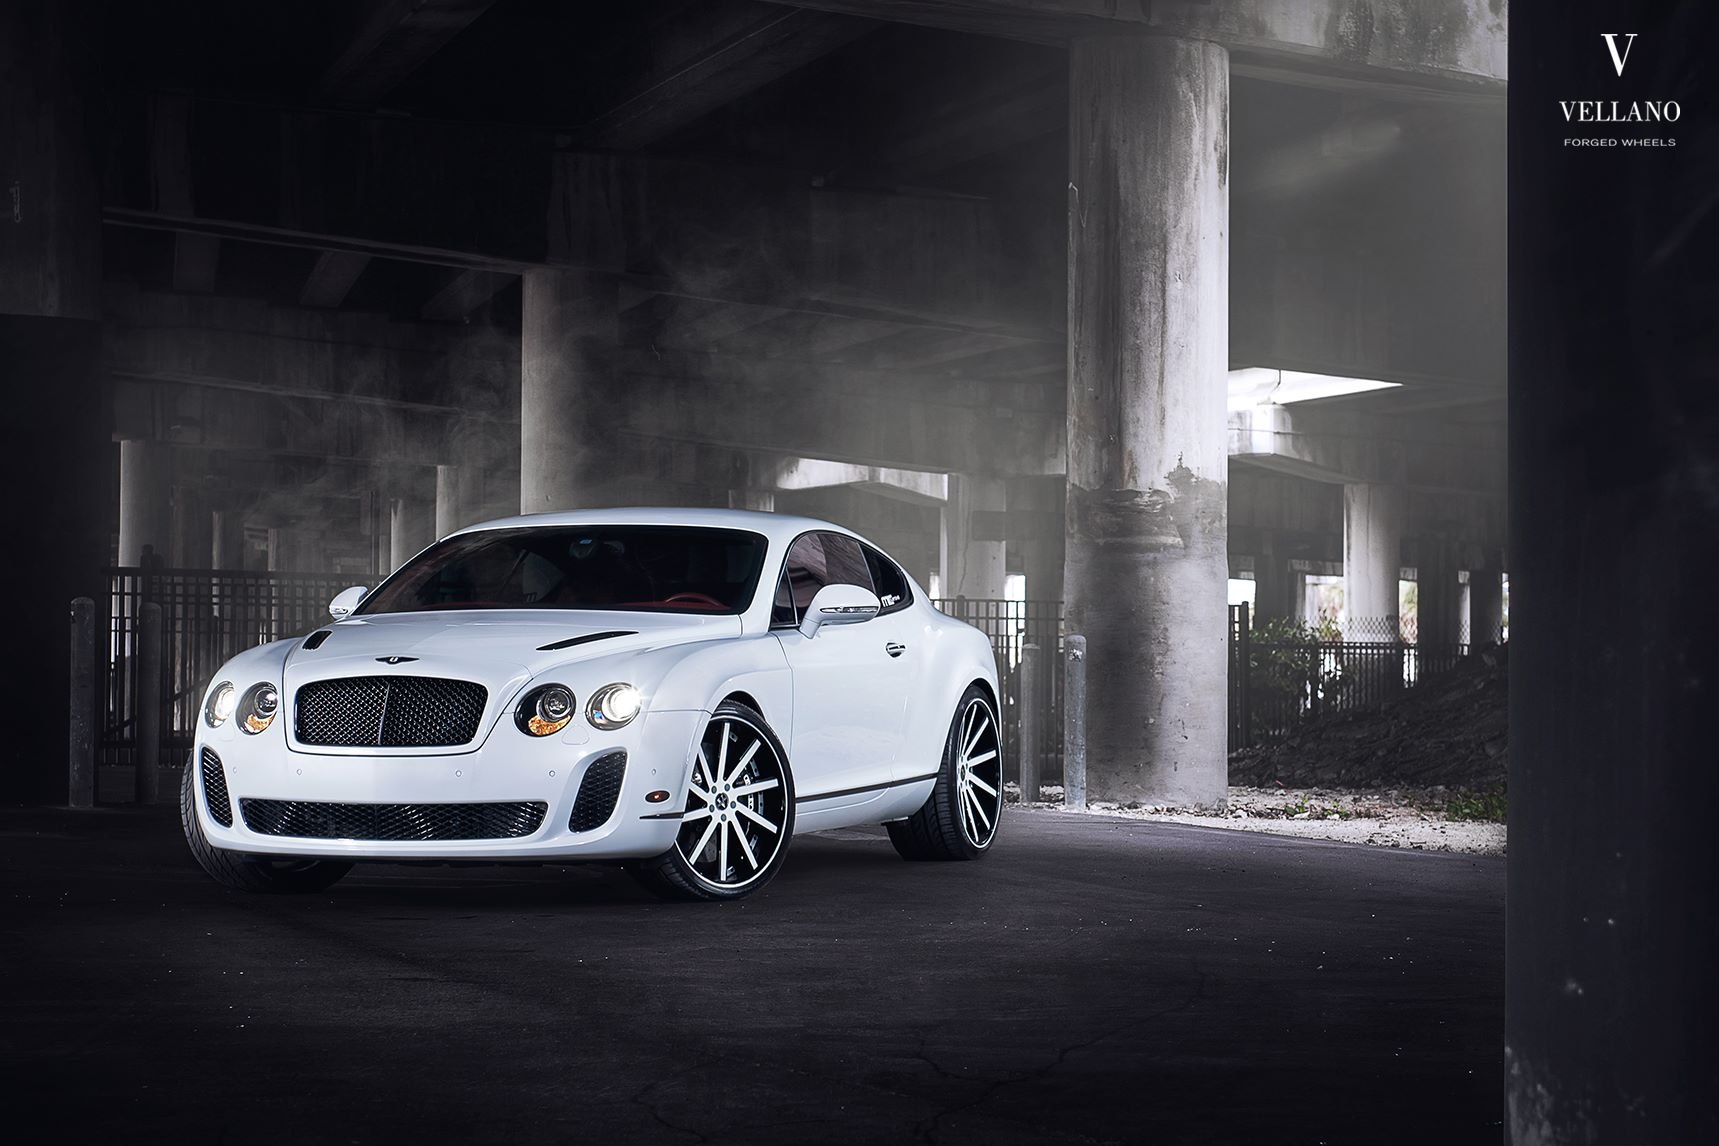 Custom Vented Hood on White Bentley Continental - Photo by Vellano